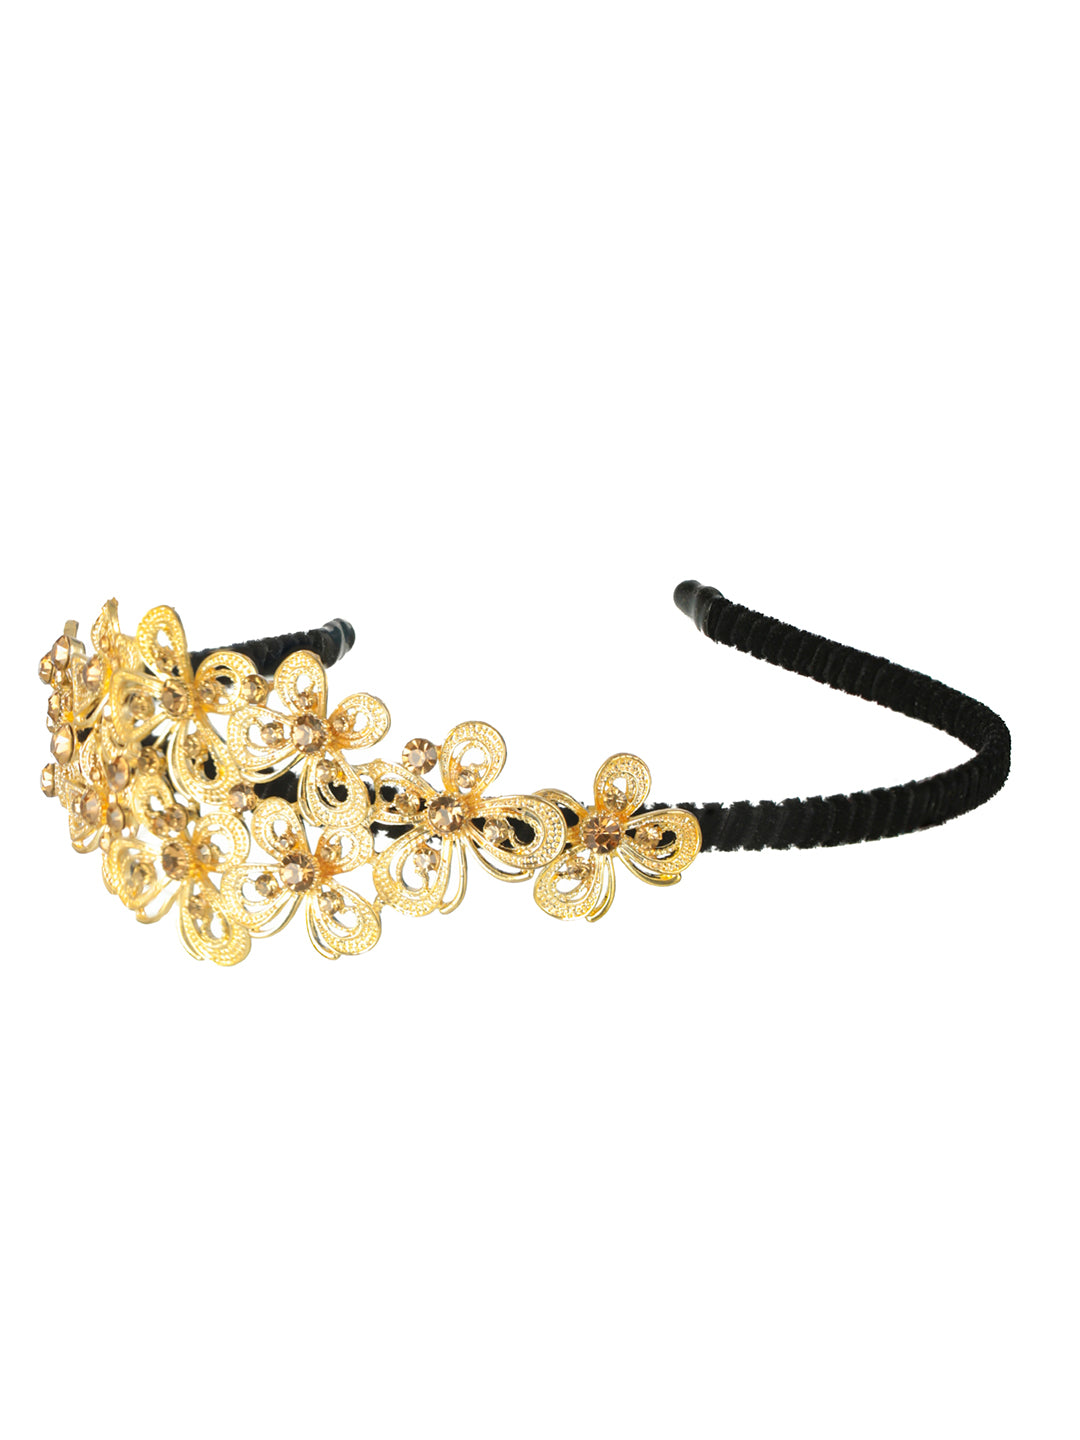 Hair Drama Co Orange Gold Plated Hair Band with Transparent Stones Buy  Hair Drama Co Orange Gold Plated Hair Band with Transparent Stones Online  at Best Price in India  Nykaa